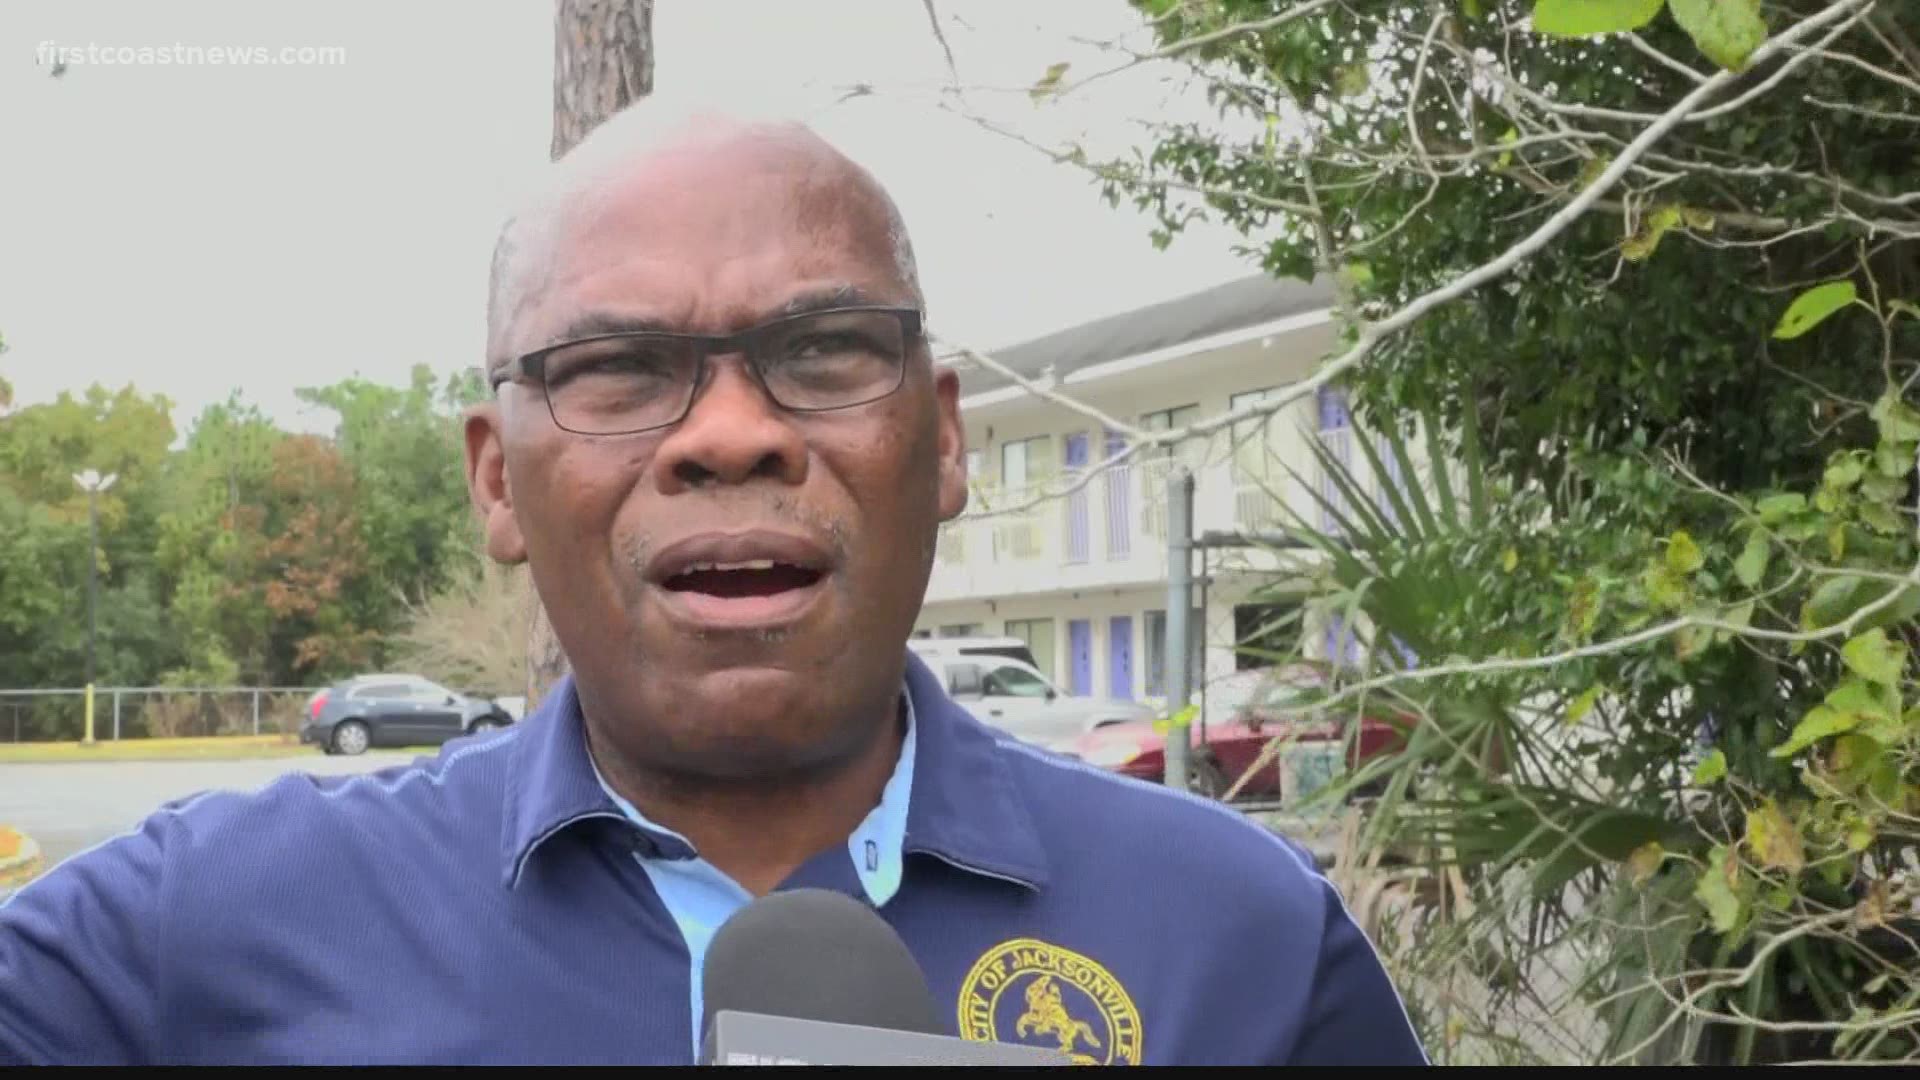 Councilman Reggie Gaffney says after talking with JSO, he found out that in a year, police responded 800 times to the area around the Gold Rush Inn.